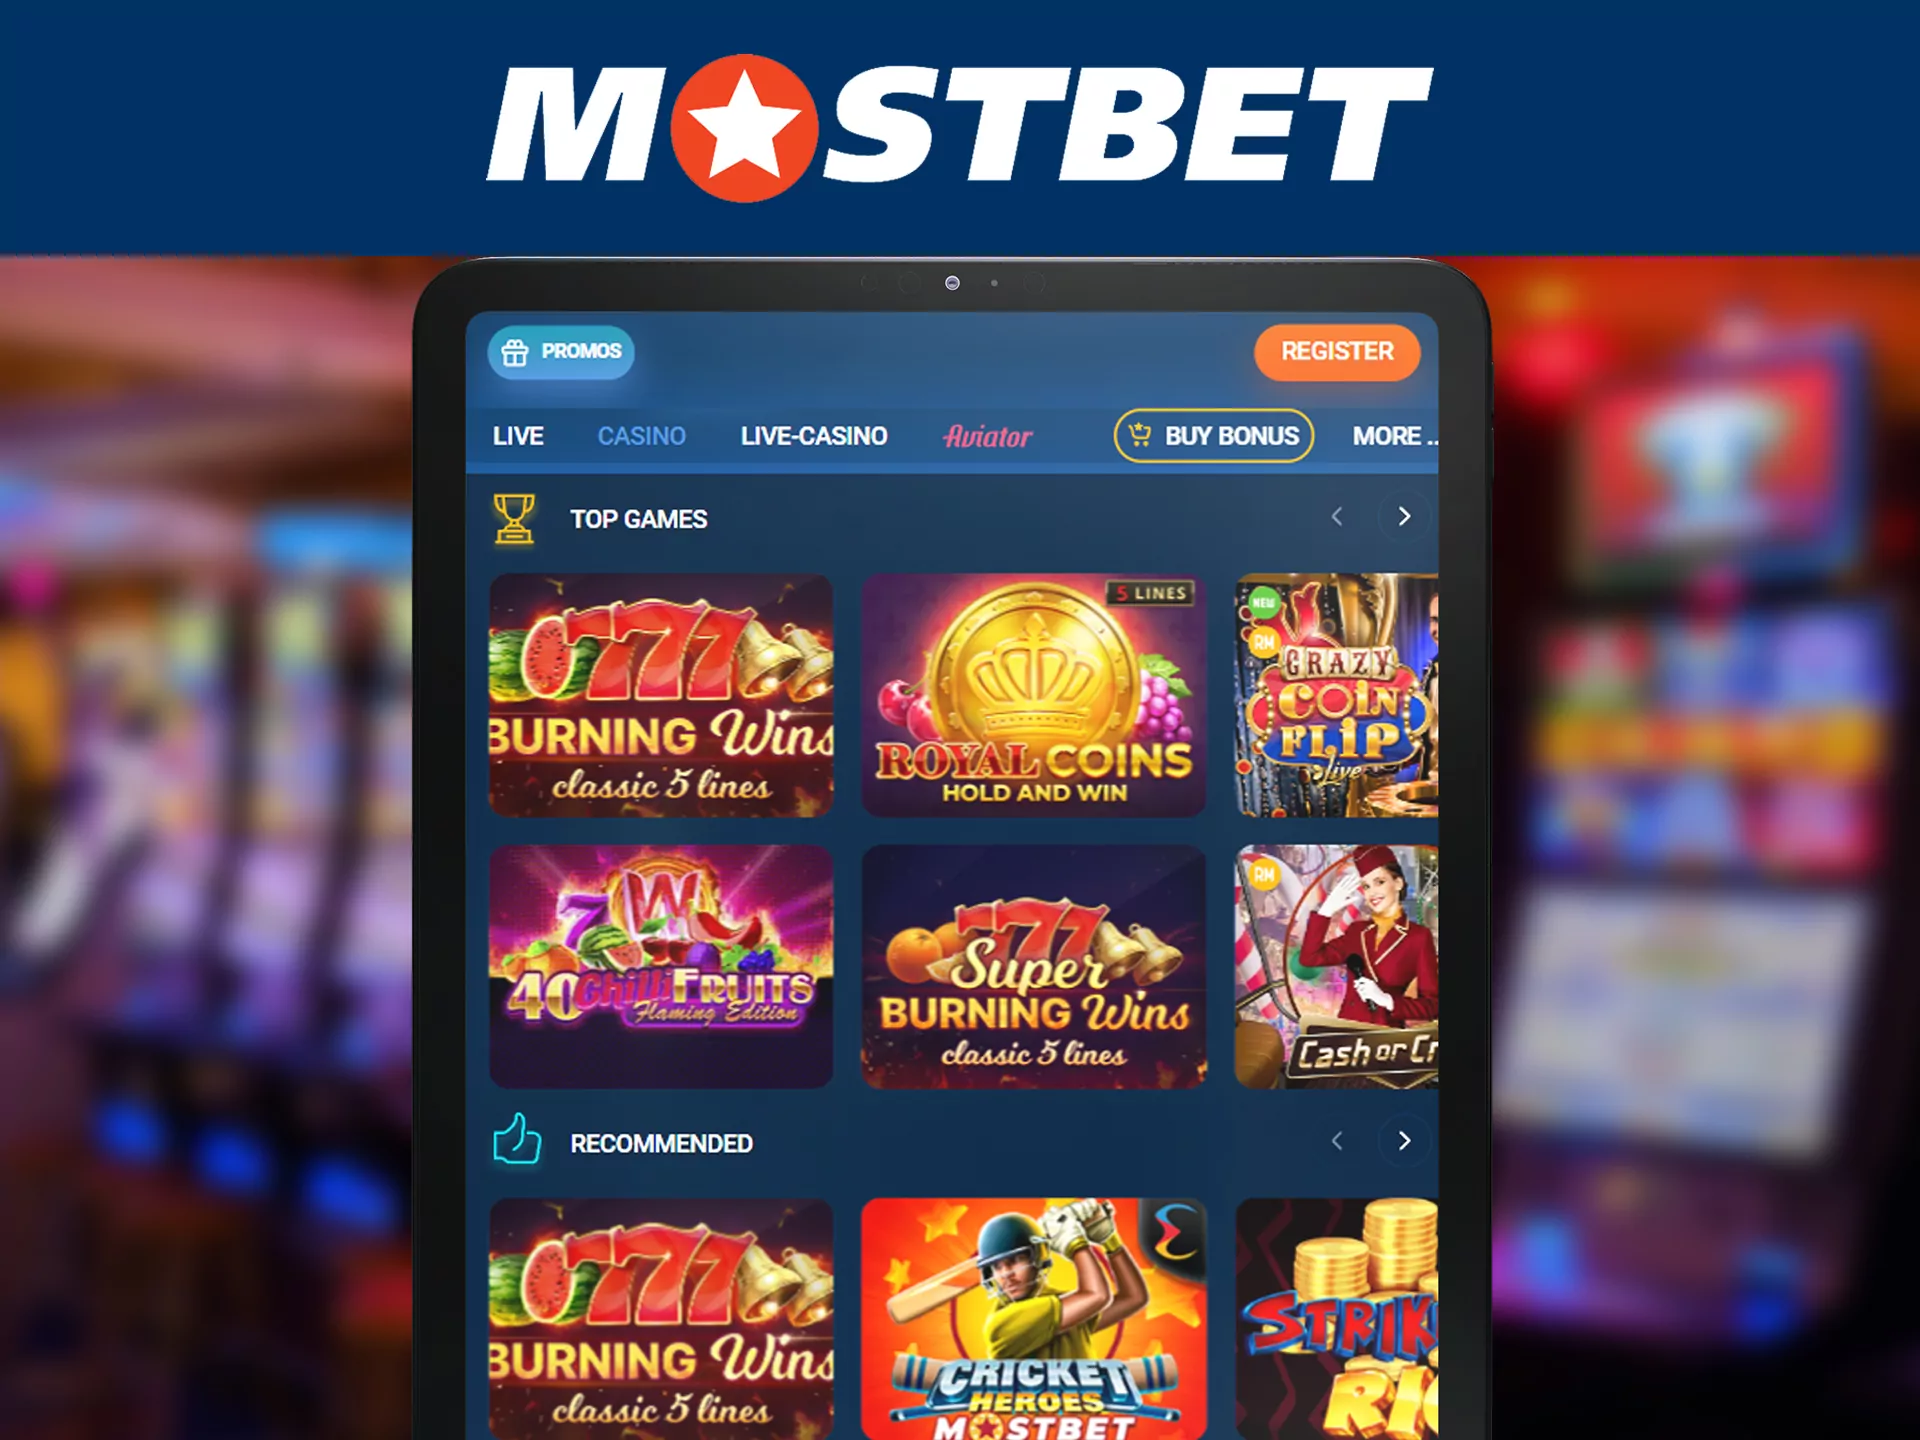 Choose your favourite casino game at Mostbet.